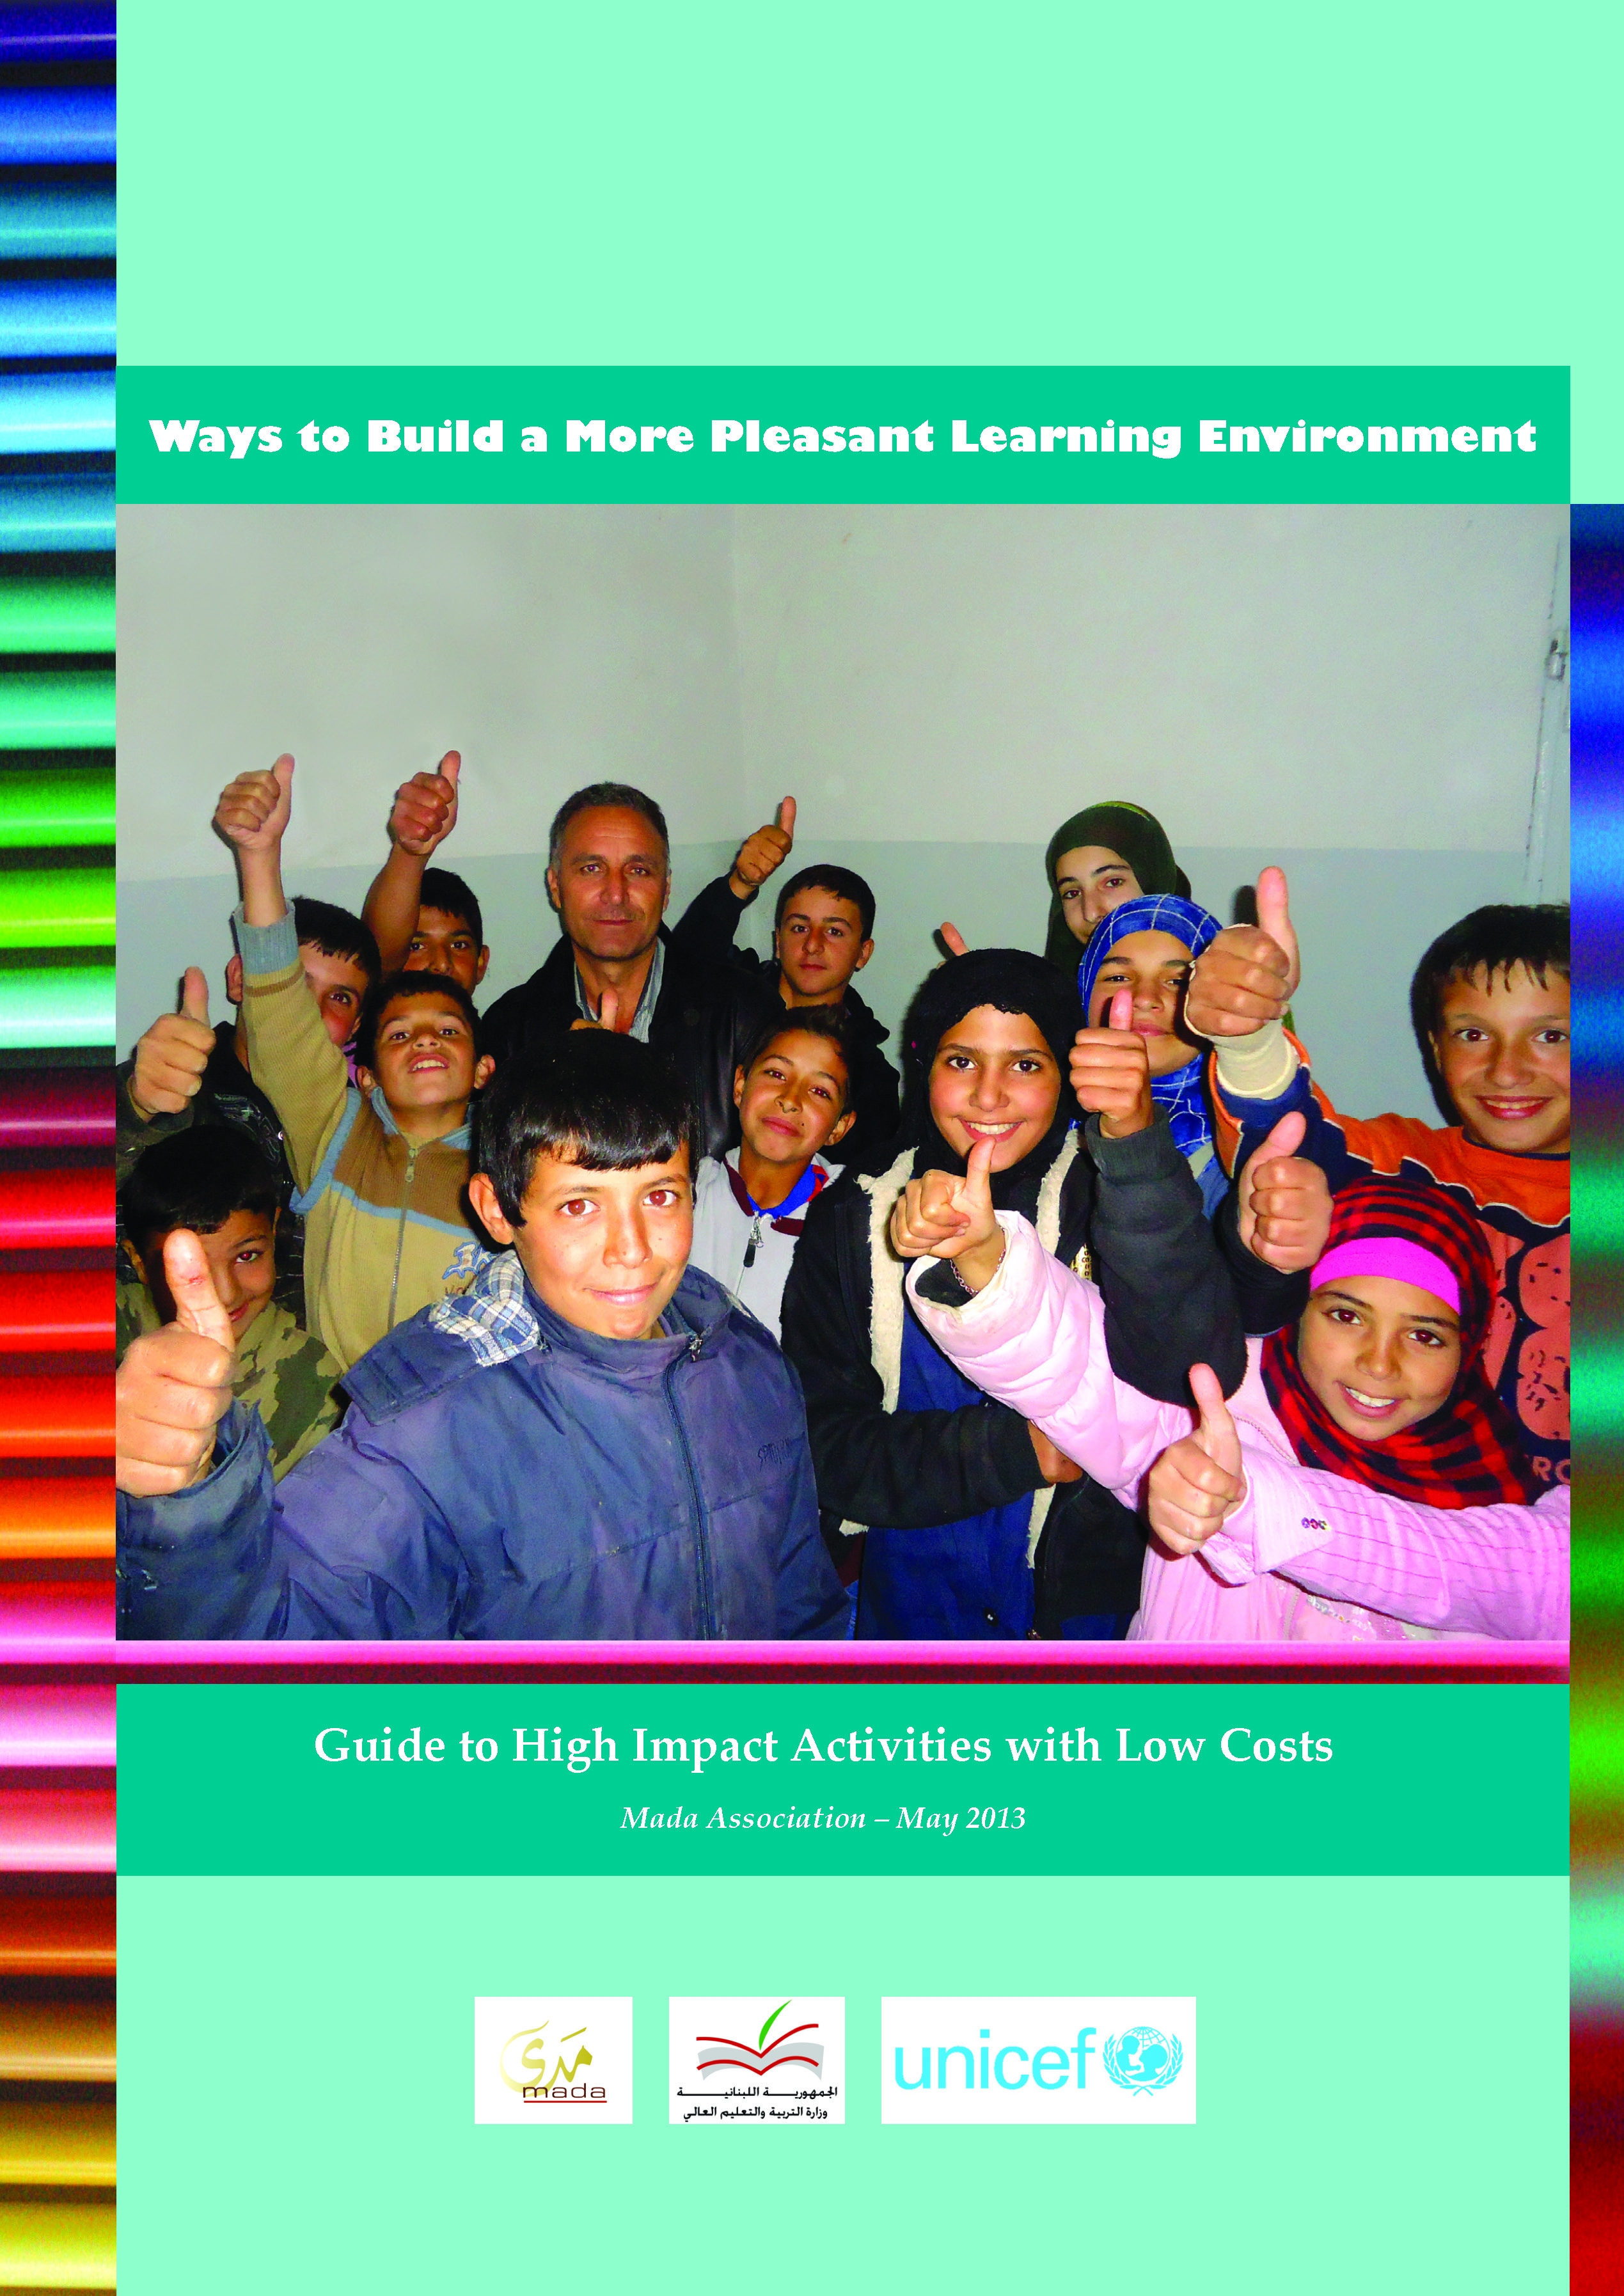 Guide To High Impact Activities With Low Costs: "ways To Build A More Pleasant Learning Environment"